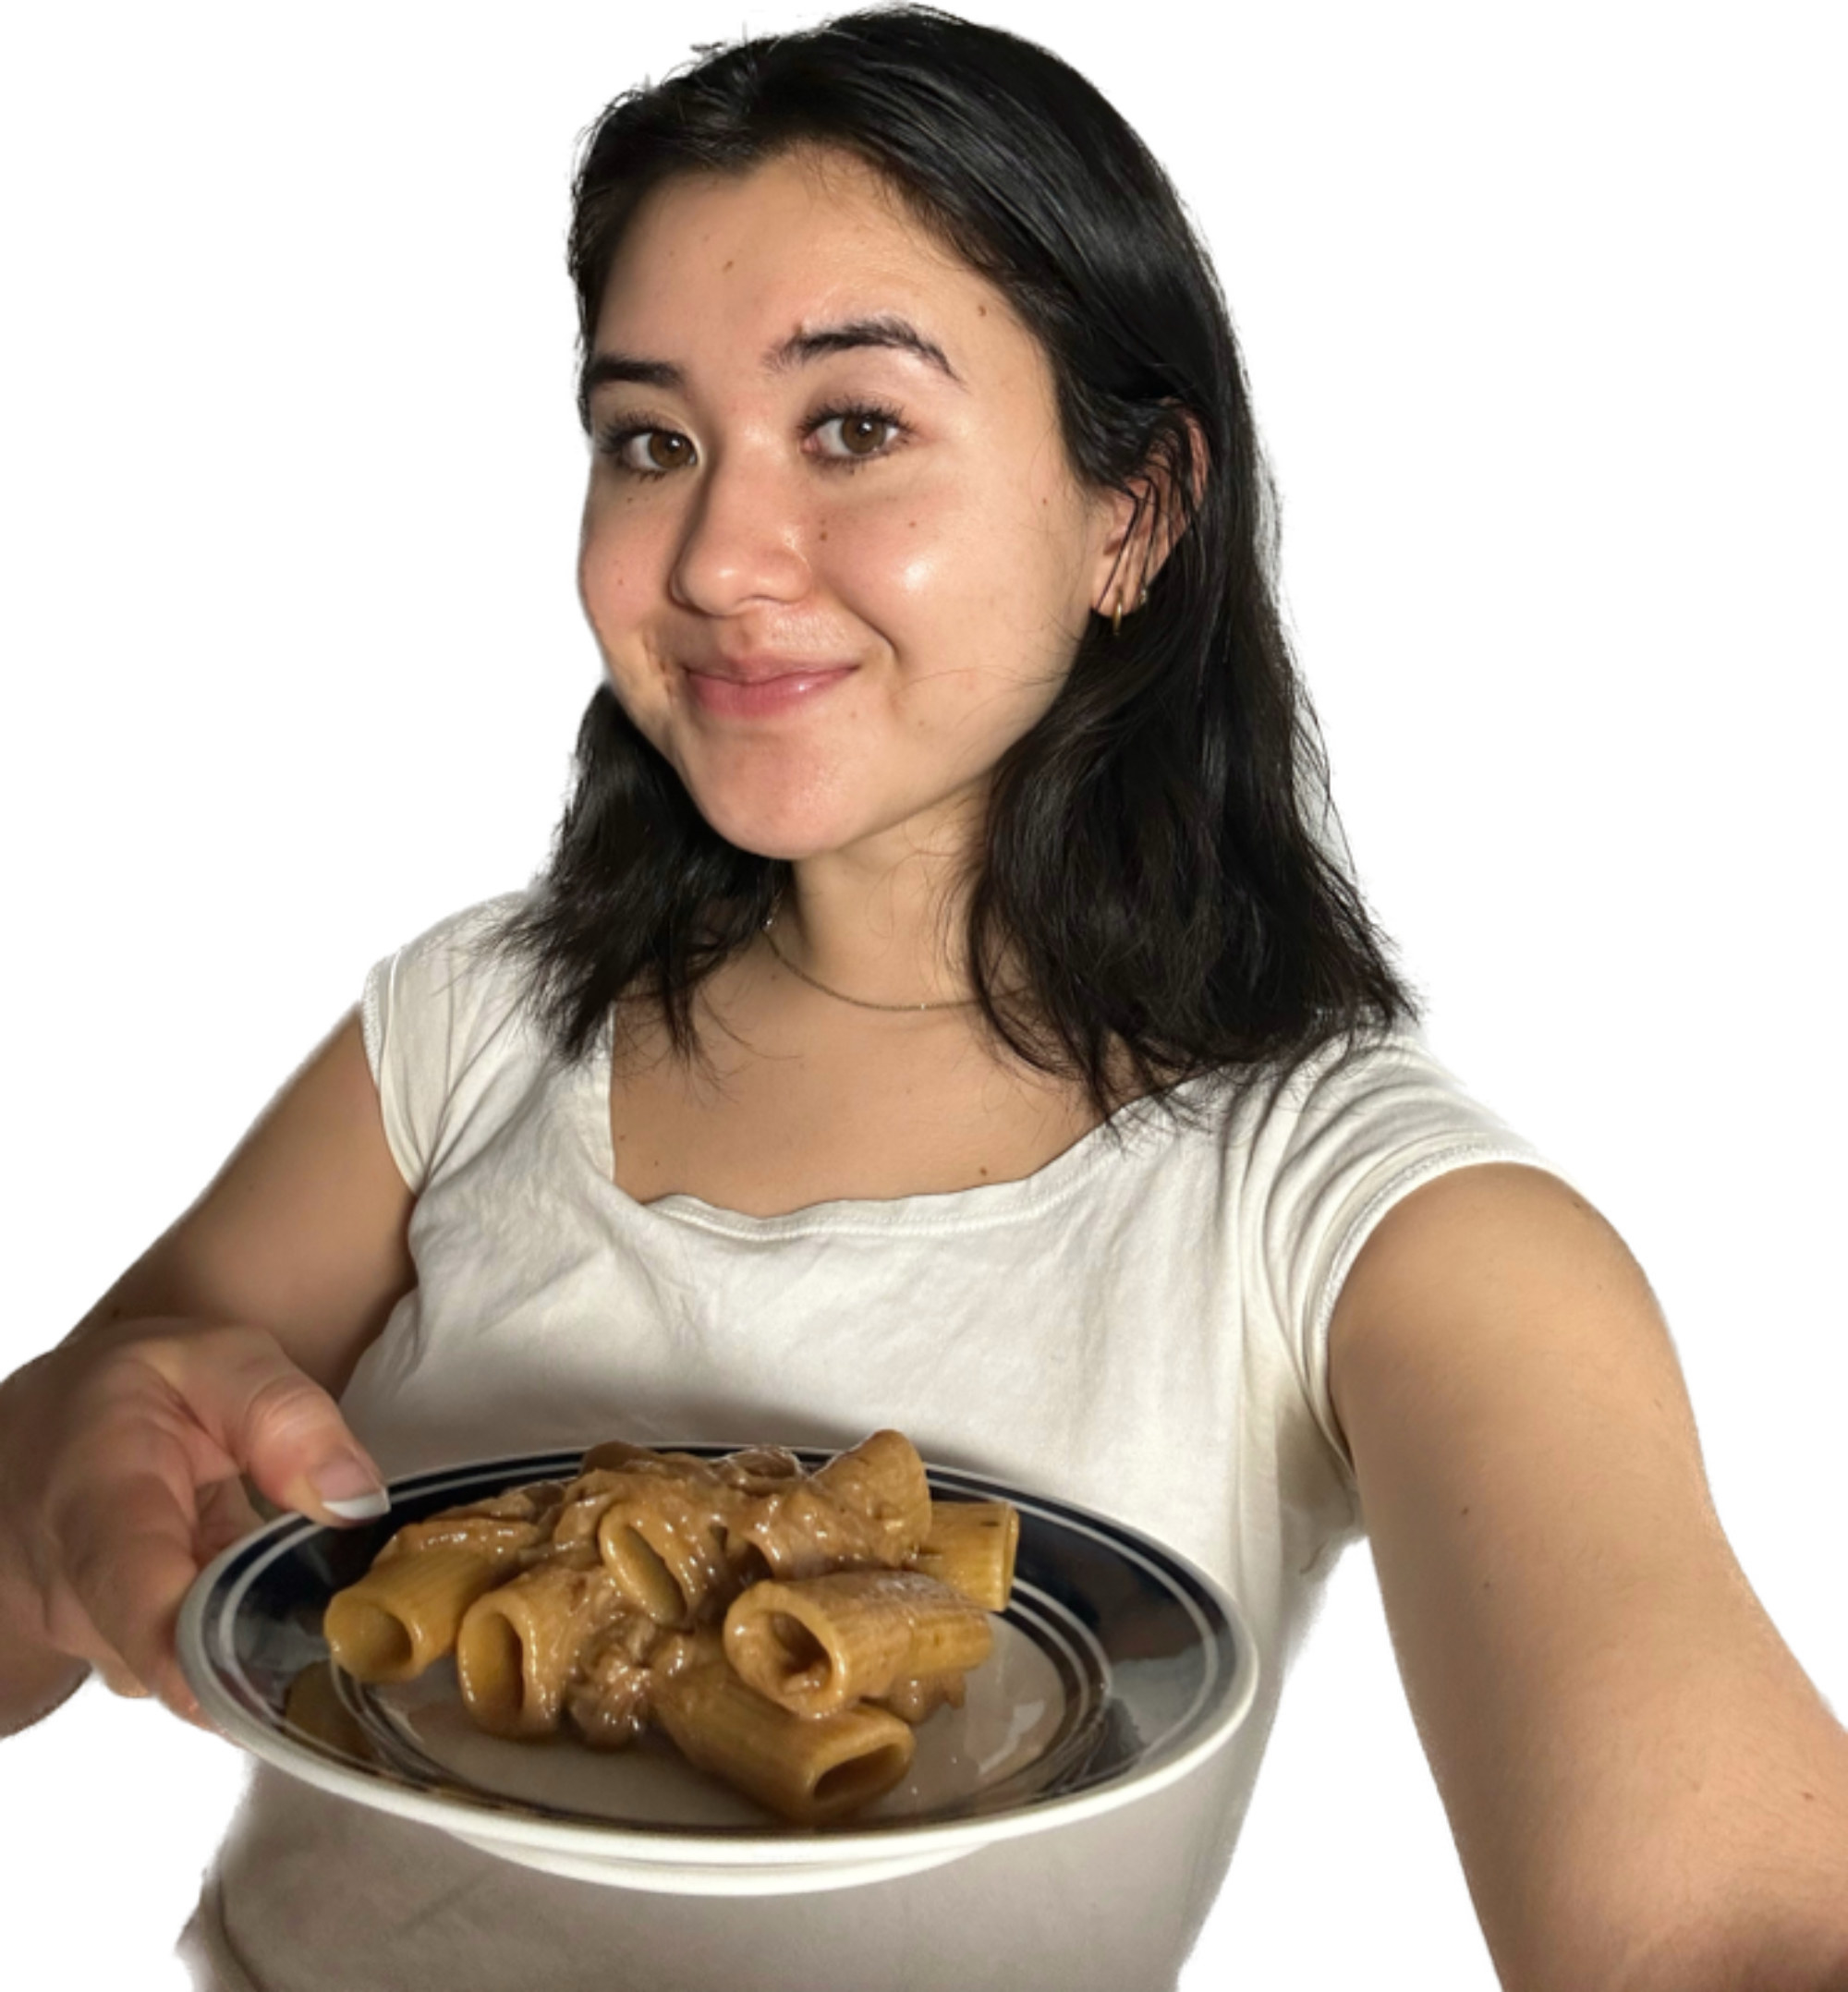 Woman holding a plate of French onion pasta